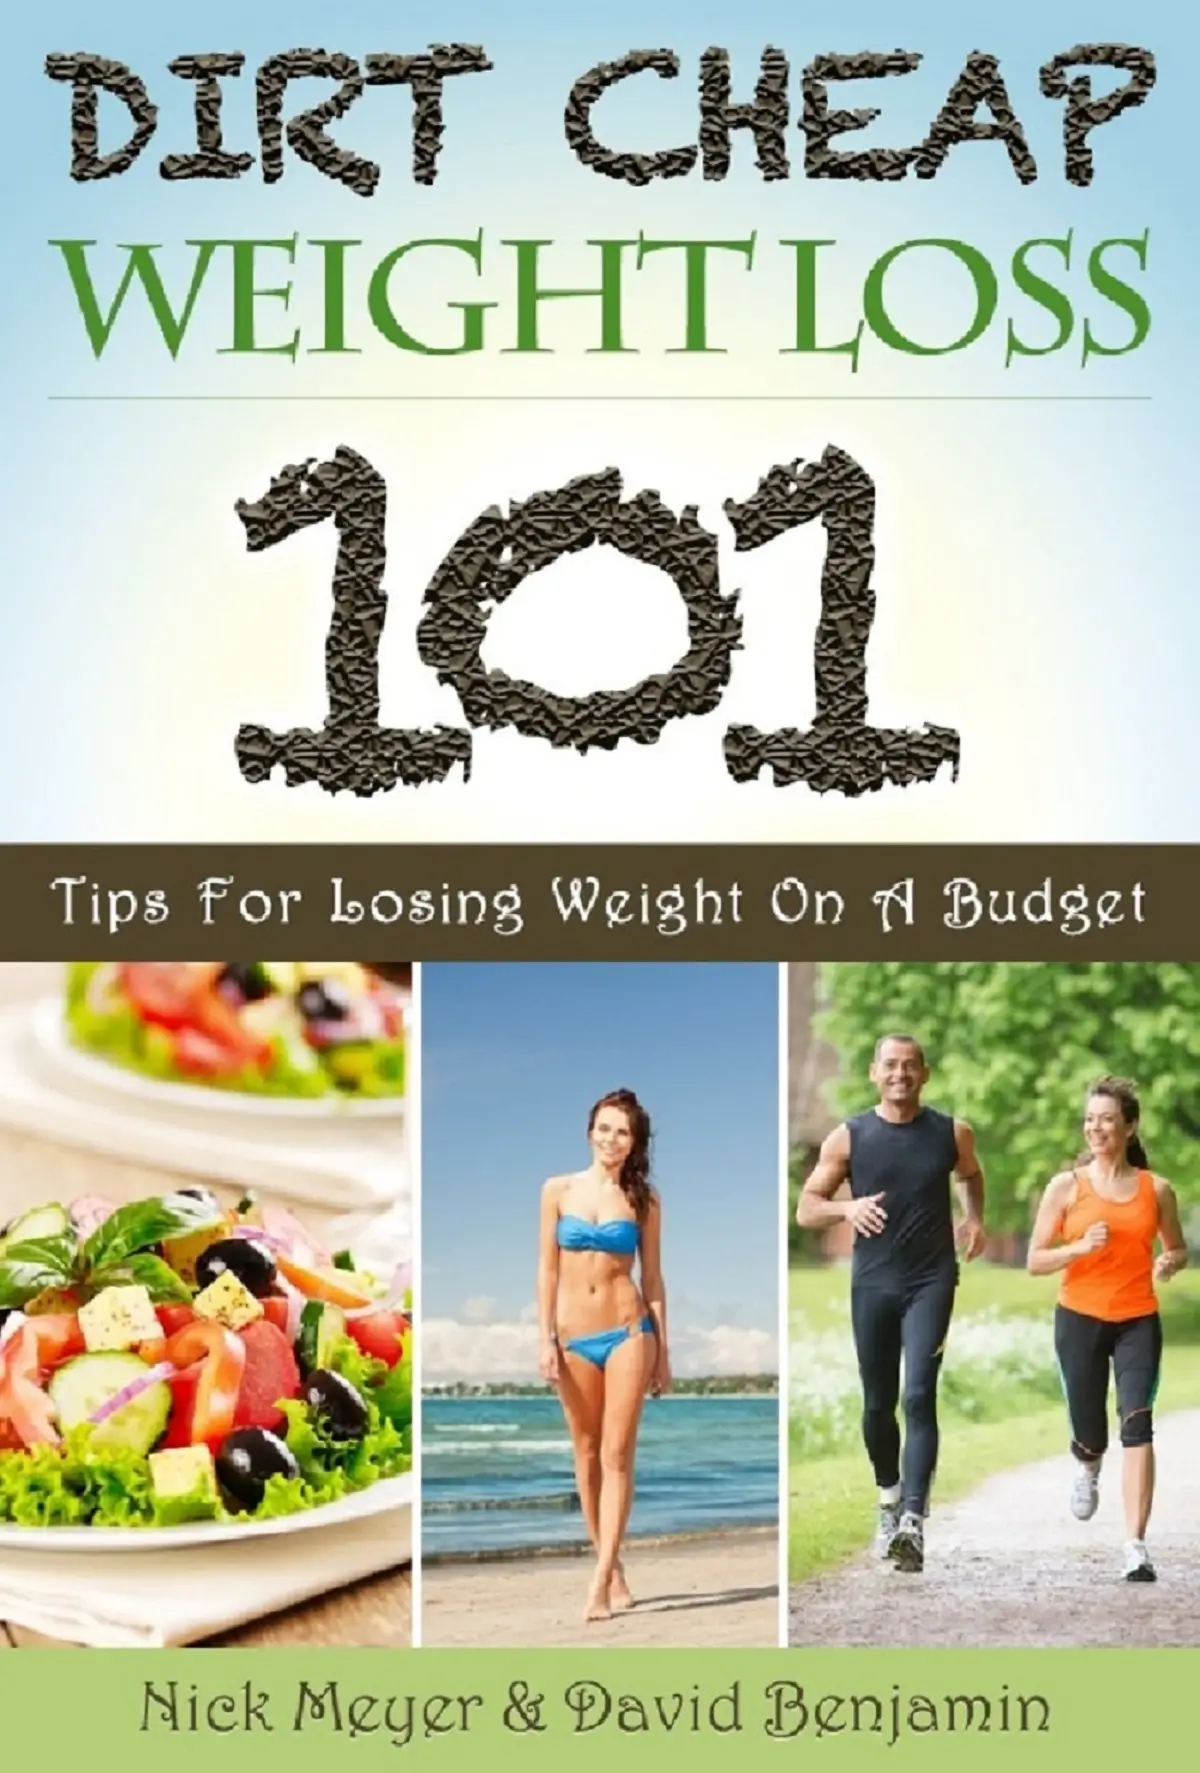 This new eBook offers tips for losing weight on a budget. 